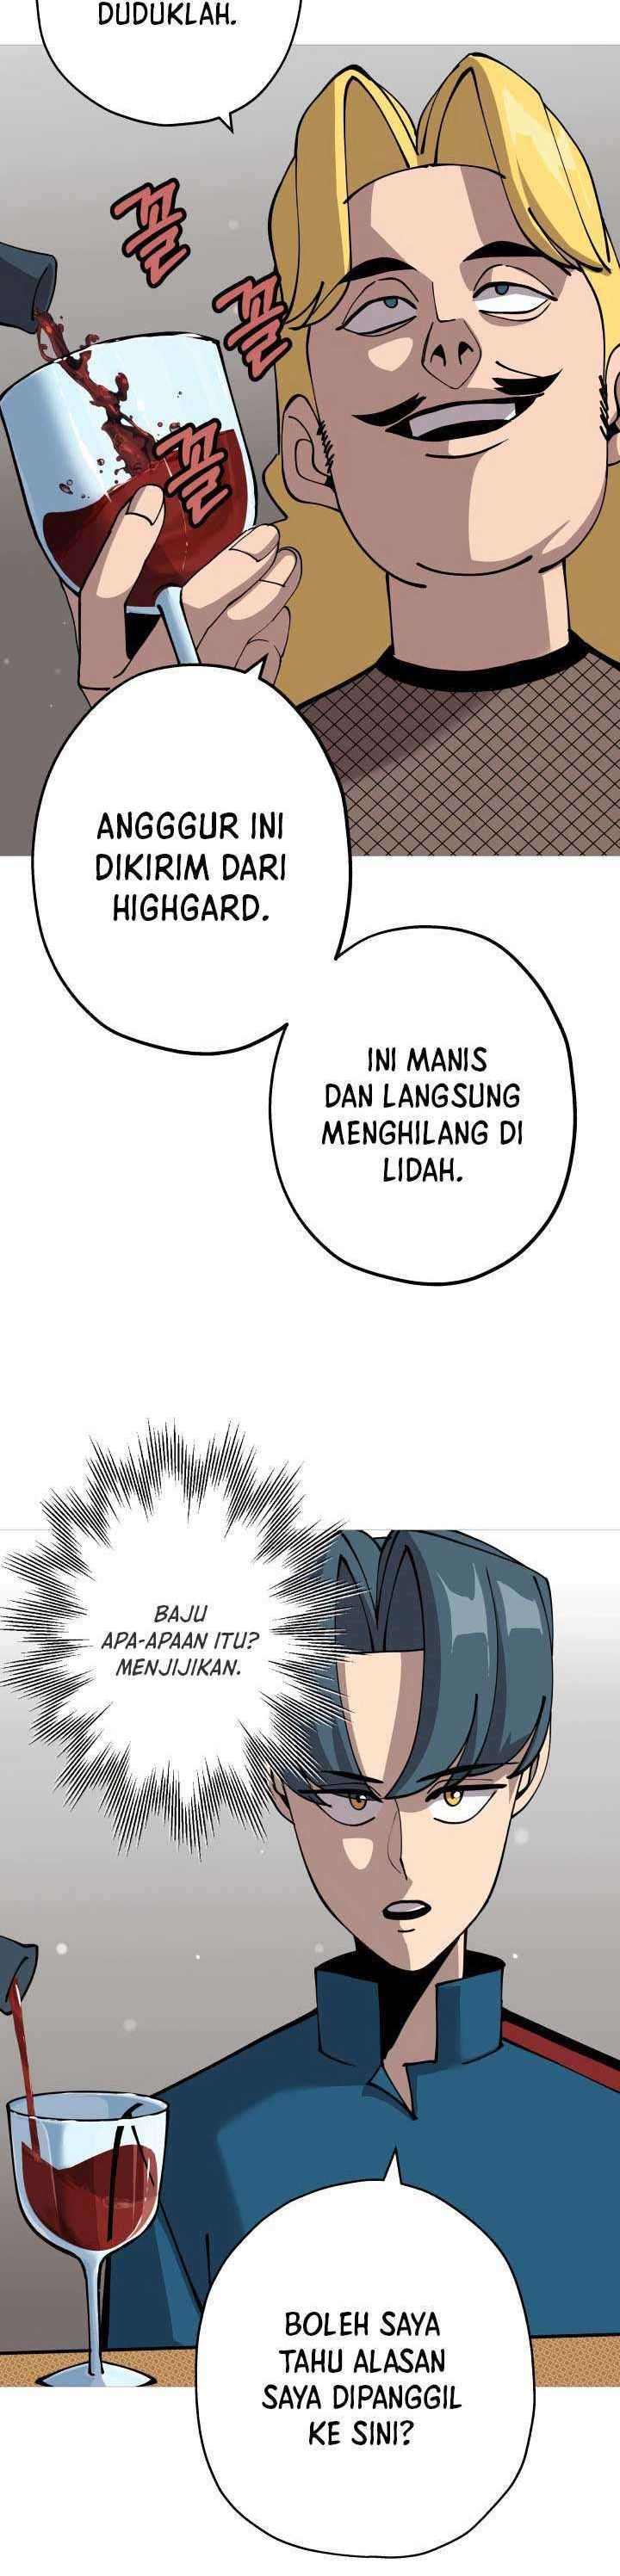 Dilarang COPAS - situs resmi www.mangacanblog.com - Komik the story of a low rank soldier becoming a monarch 029 - chapter 29 30 Indonesia the story of a low rank soldier becoming a monarch 029 - chapter 29 Terbaru 6|Baca Manga Komik Indonesia|Mangacan